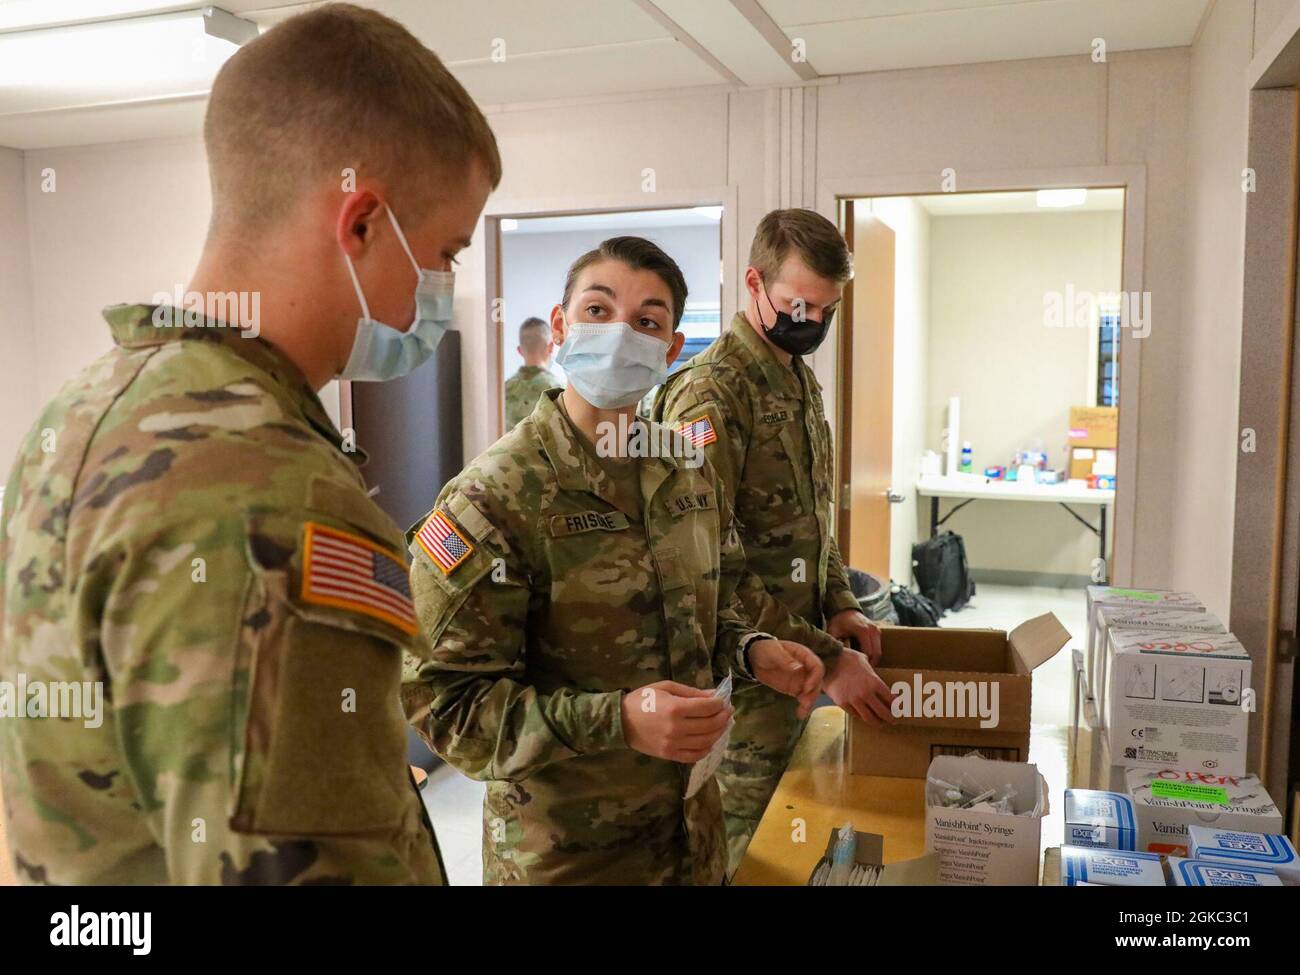 U.S. Army Pfc. Jacob Hoskins (left), a combat medic assigned to 2nd Battalion, 70th Armor Regiment, 2nd Armored Brigade Combat Team, 1st Infantry Division, receives training from U.S. Army 2nd Lt. Maria Frisone (center), a medical surgical nurse at Walter Reed National Medical Center, Bethesda, Maryland, on how to properly assist with preparing COVID-19 vaccinations at the Fair Park Community Vaccination Center in Dallas, March 9, 2021. Through a federal validation process, it was determined that U.S. service members could assist FEMA in its national effort to help vaccinate American citizens. Stock Photo